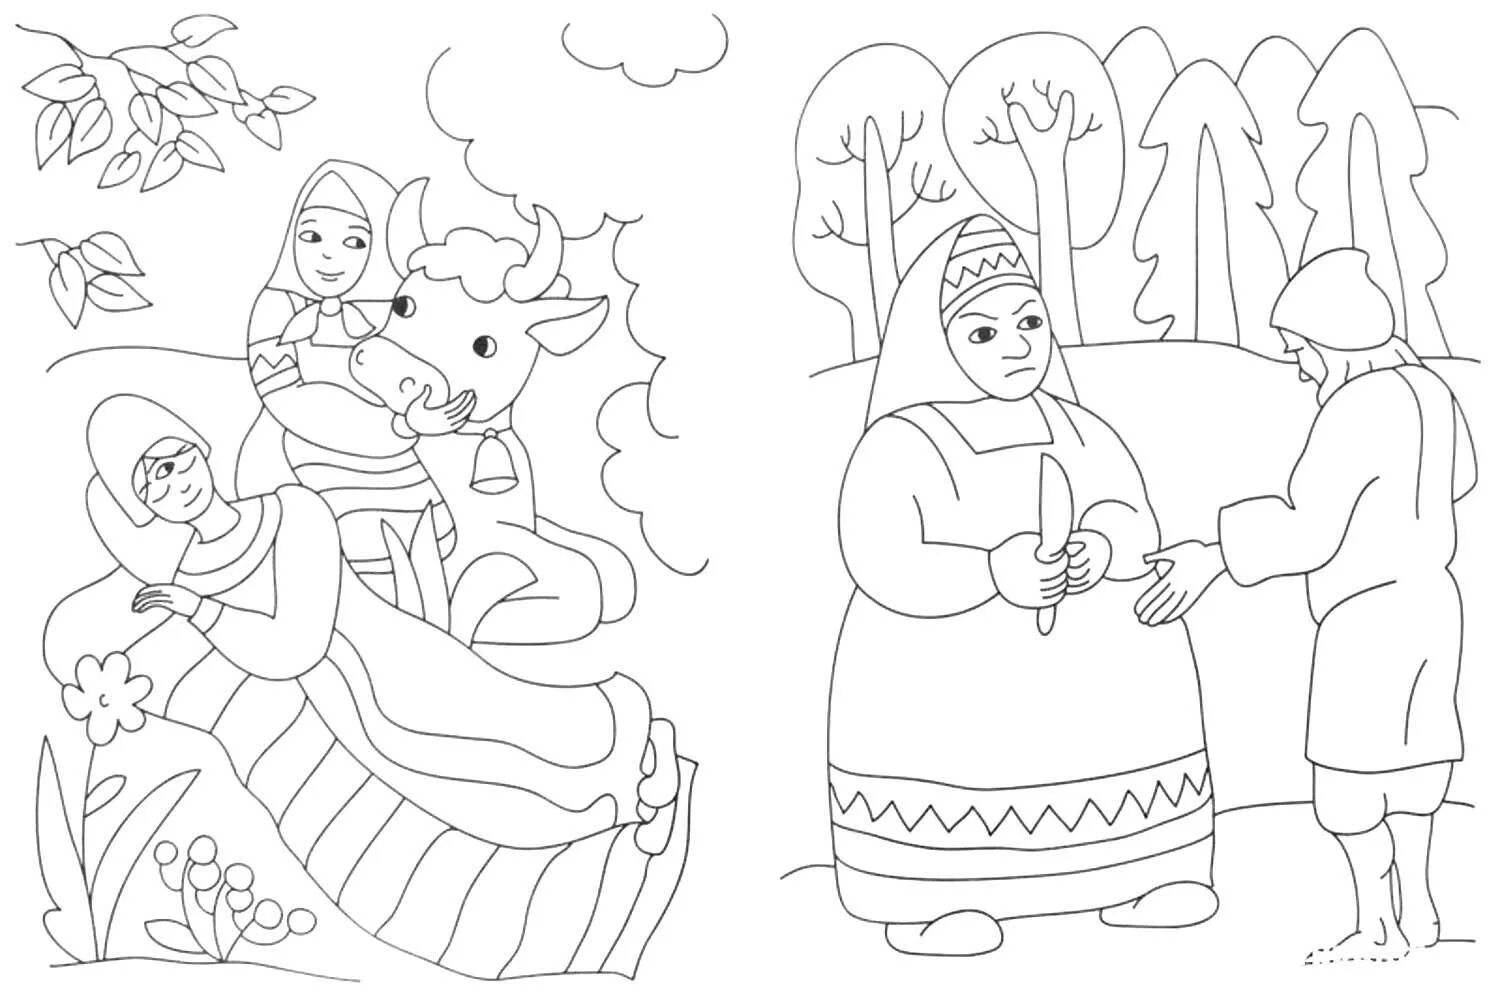 Fun coloring book 12 months for babies